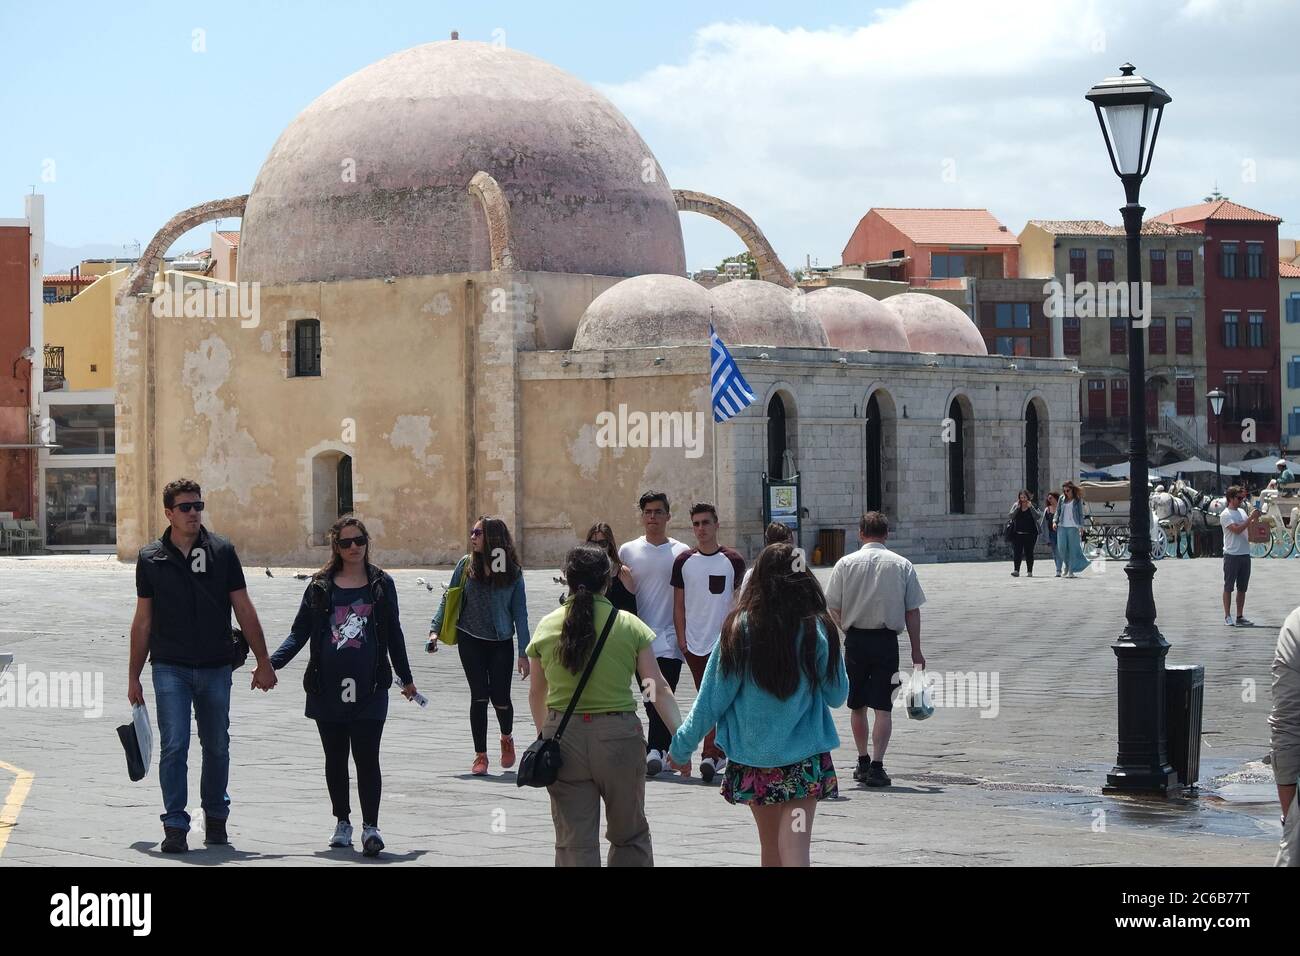 Chania, Crete, Greece. Ancient Mosque at the Venetian harbor. Holiday makers wander by.  Landscape aspect.  Copy space. Stock Photo